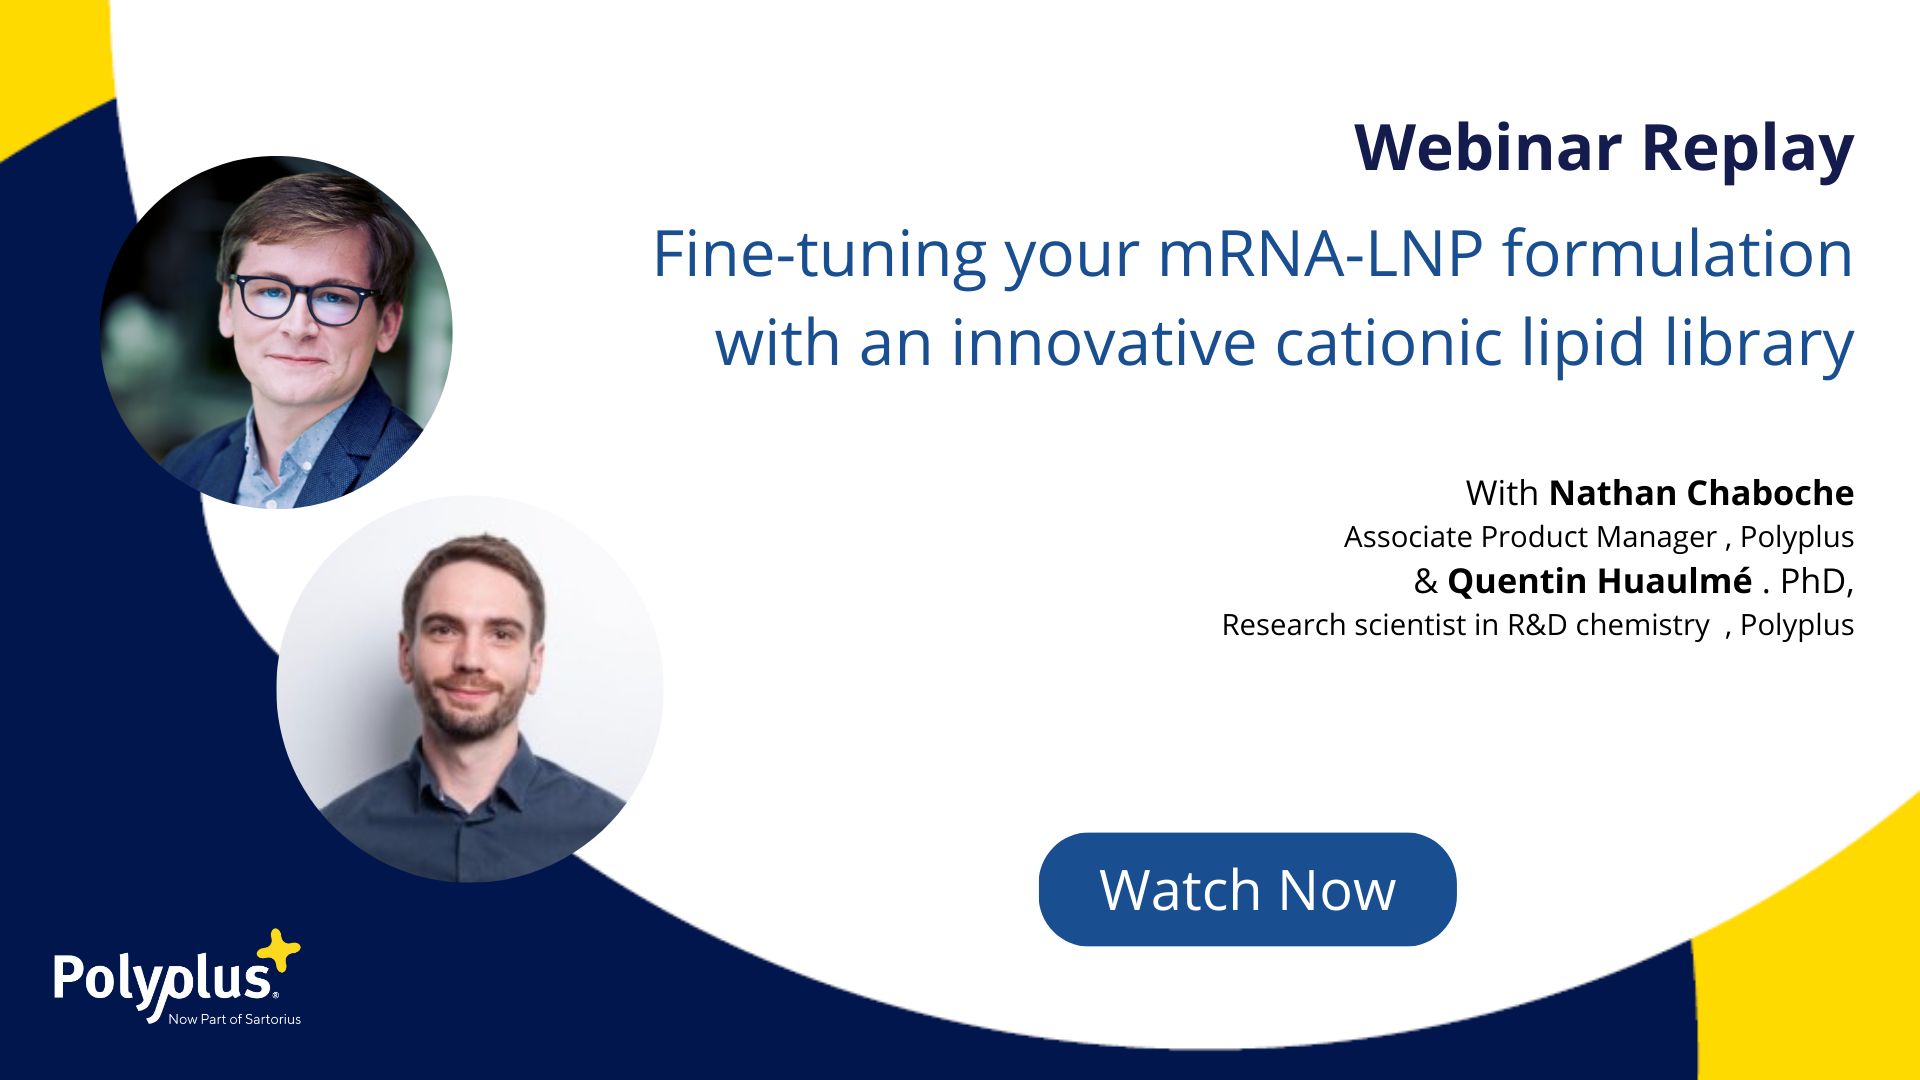 Webinar Replay : Fine-tuning your mRNA-LNP formulation with an innovative cationic lipid library